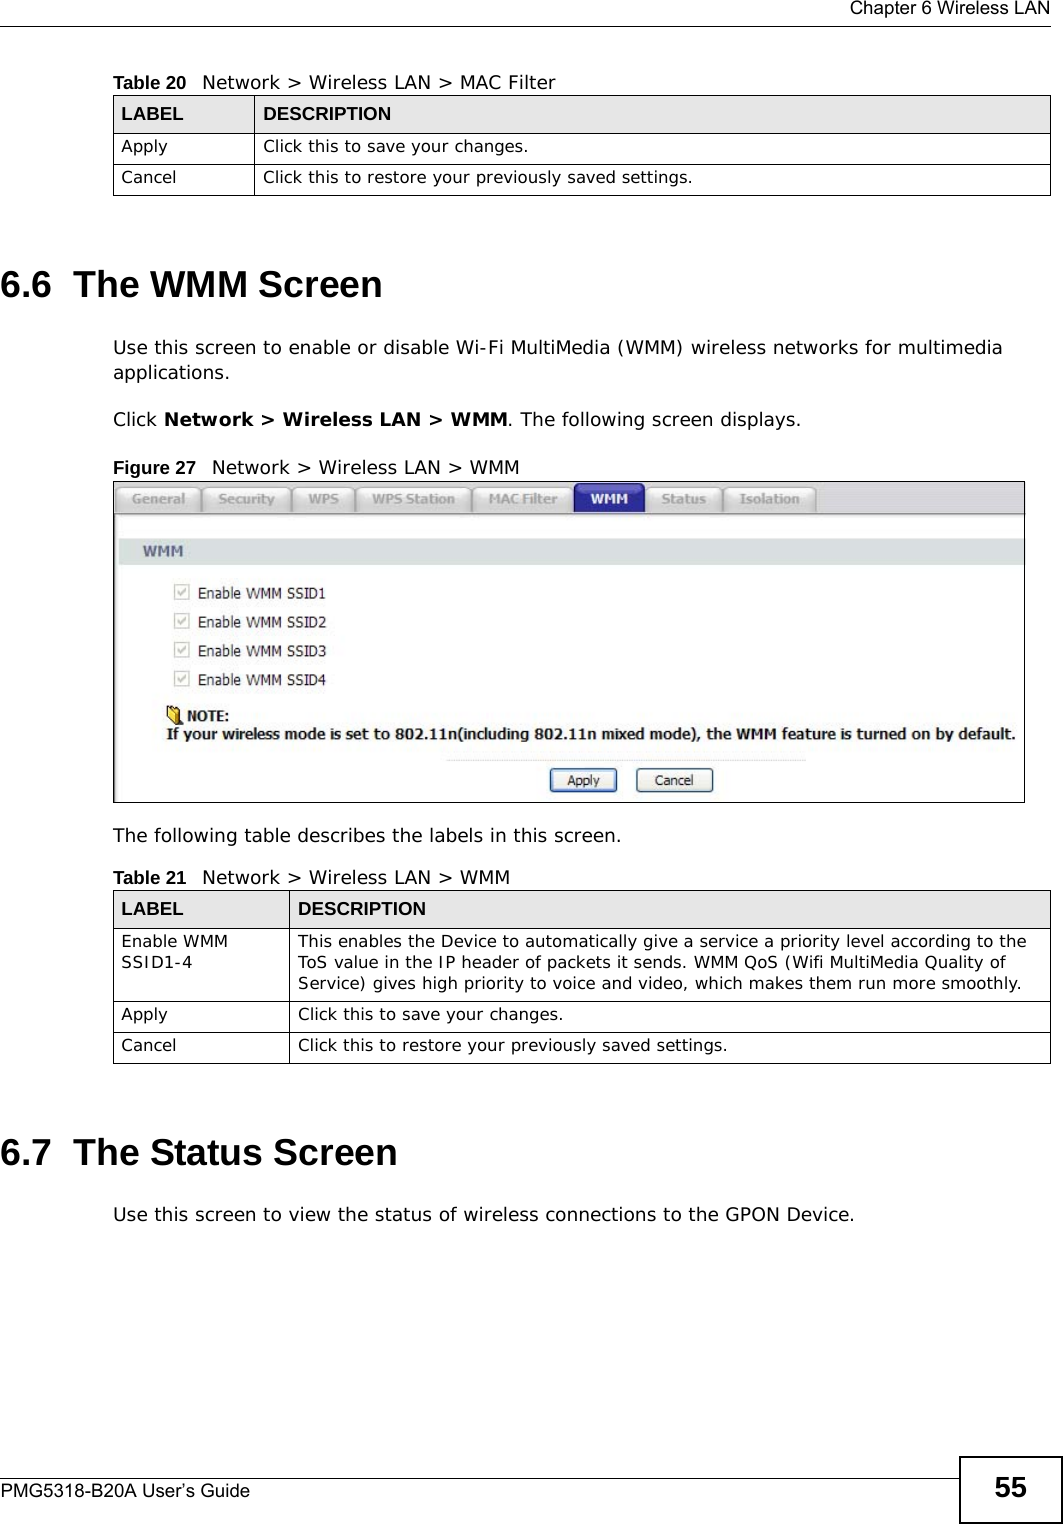  Chapter 6 Wireless LANPMG5318-B20A User’s Guide 556.6  The WMM ScreenUse this screen to enable or disable Wi-Fi MultiMedia (WMM) wireless networks for multimedia applications.Click Network &gt; Wireless LAN &gt; WMM. The following screen displays.Figure 27   Network &gt; Wireless LAN &gt; WMM The following table describes the labels in this screen.6.7  The Status ScreenUse this screen to view the status of wireless connections to the GPON Device.Apply Click this to save your changes.Cancel Click this to restore your previously saved settings.Table 20   Network &gt; Wireless LAN &gt; MAC FilterLABEL DESCRIPTIONTable 21   Network &gt; Wireless LAN &gt; WMMLABEL DESCRIPTIONEnable WMM SSID1-4 This enables the Device to automatically give a service a priority level according to the ToS value in the IP header of packets it sends. WMM QoS (Wifi MultiMedia Quality of Service) gives high priority to voice and video, which makes them run more smoothly.Apply Click this to save your changes.Cancel Click this to restore your previously saved settings.